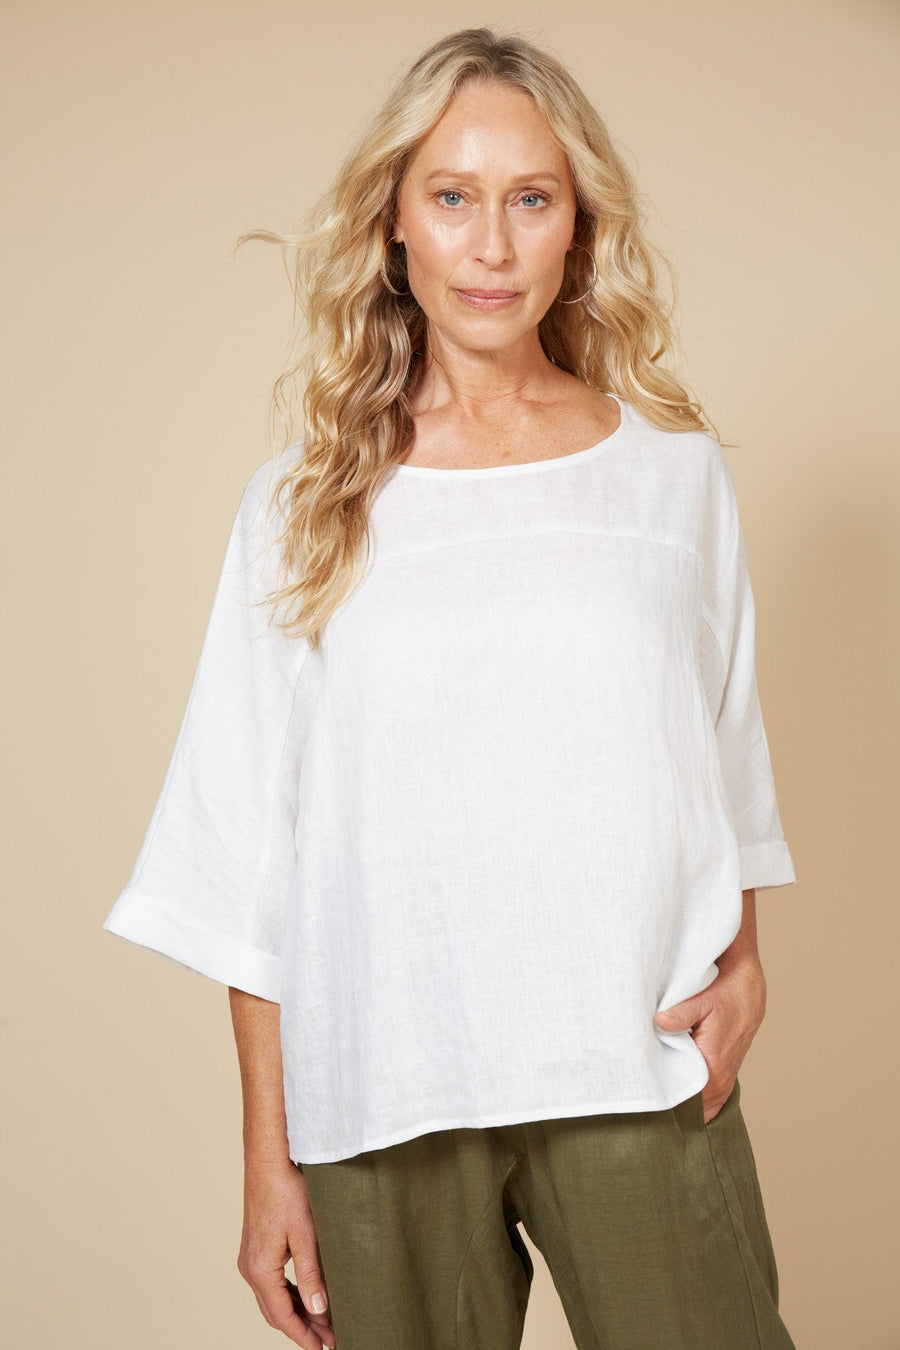 Eb & Ive Studio Relaxed Top 100% Linen